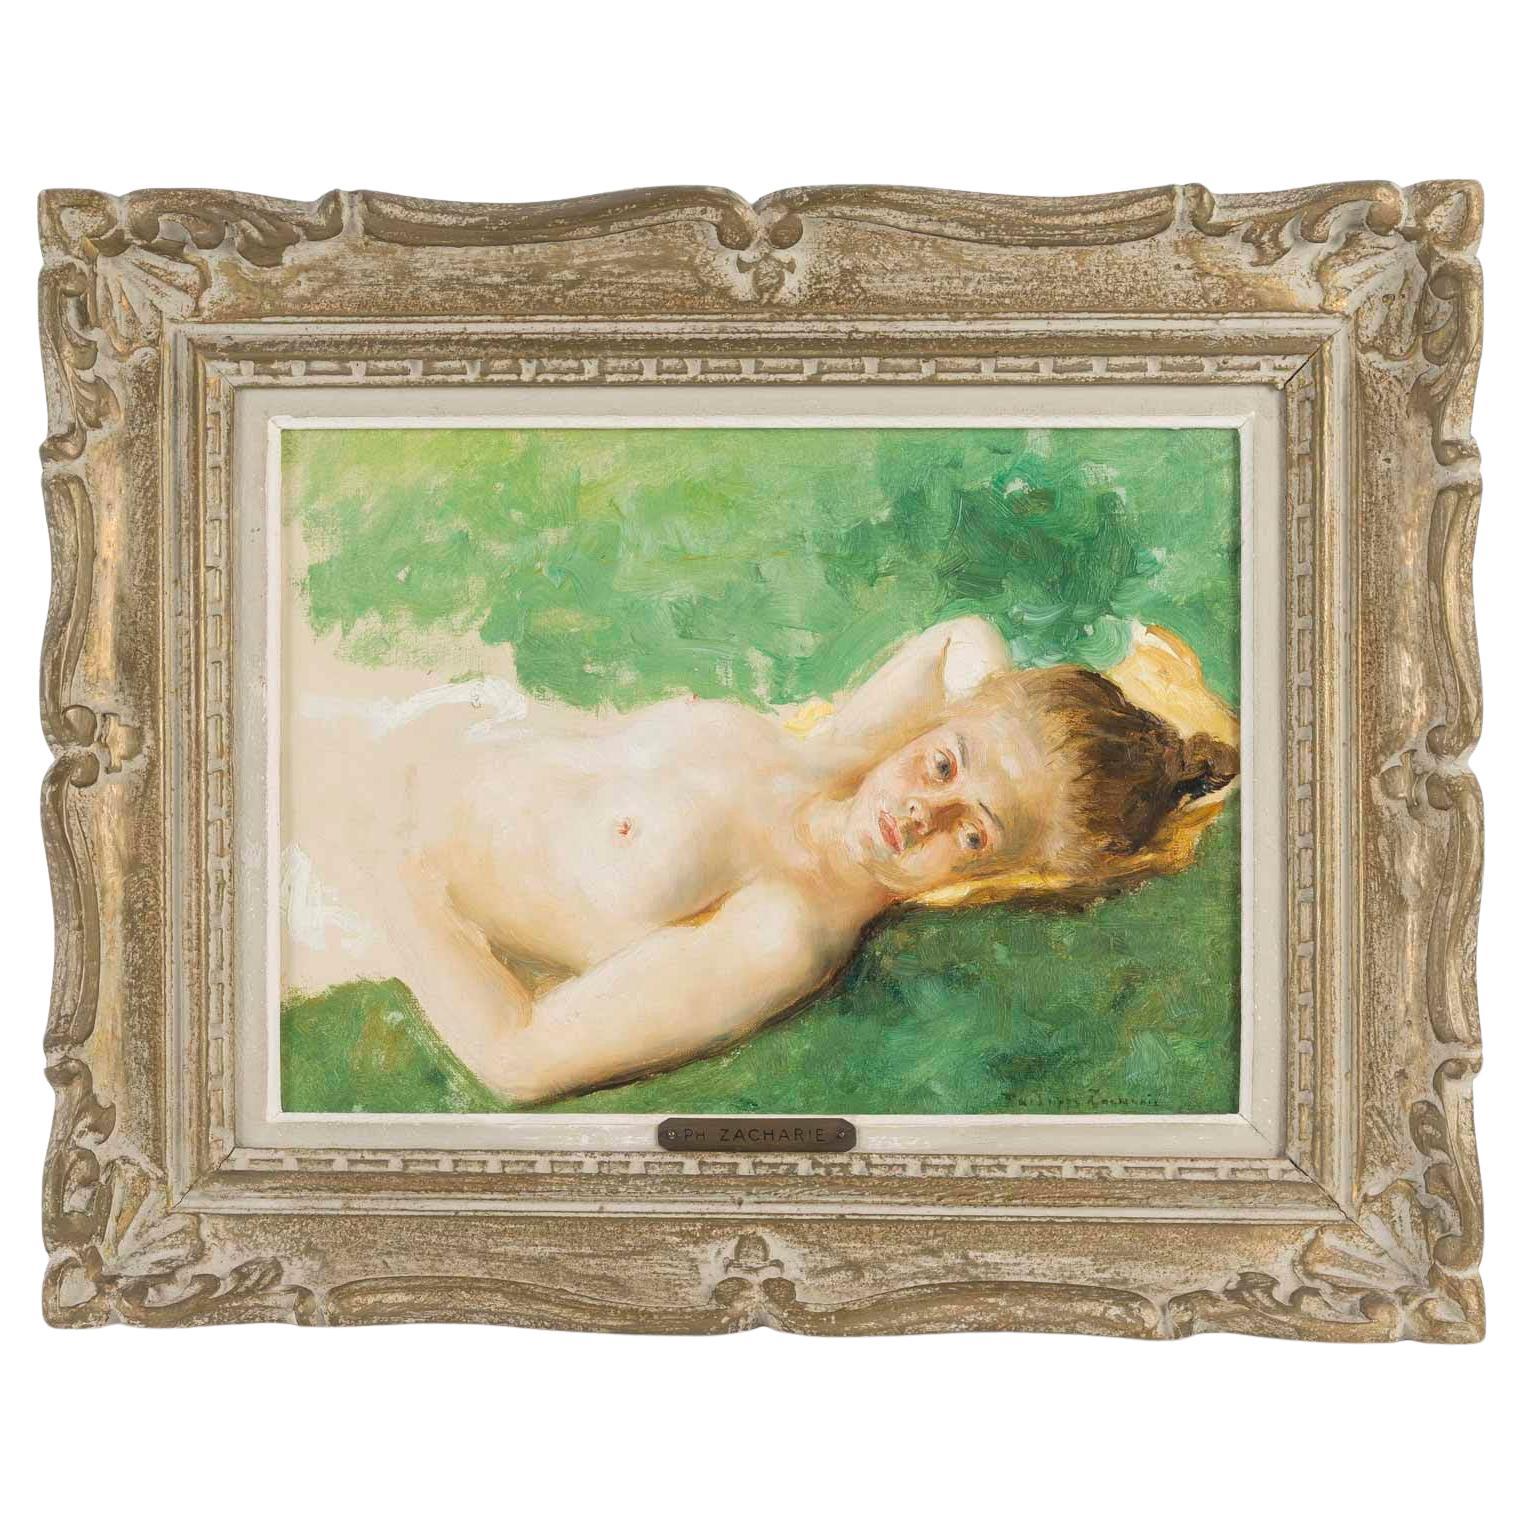 Oil on Canvas, Painting by Philippe Zacharie (1849-1915). For Sale